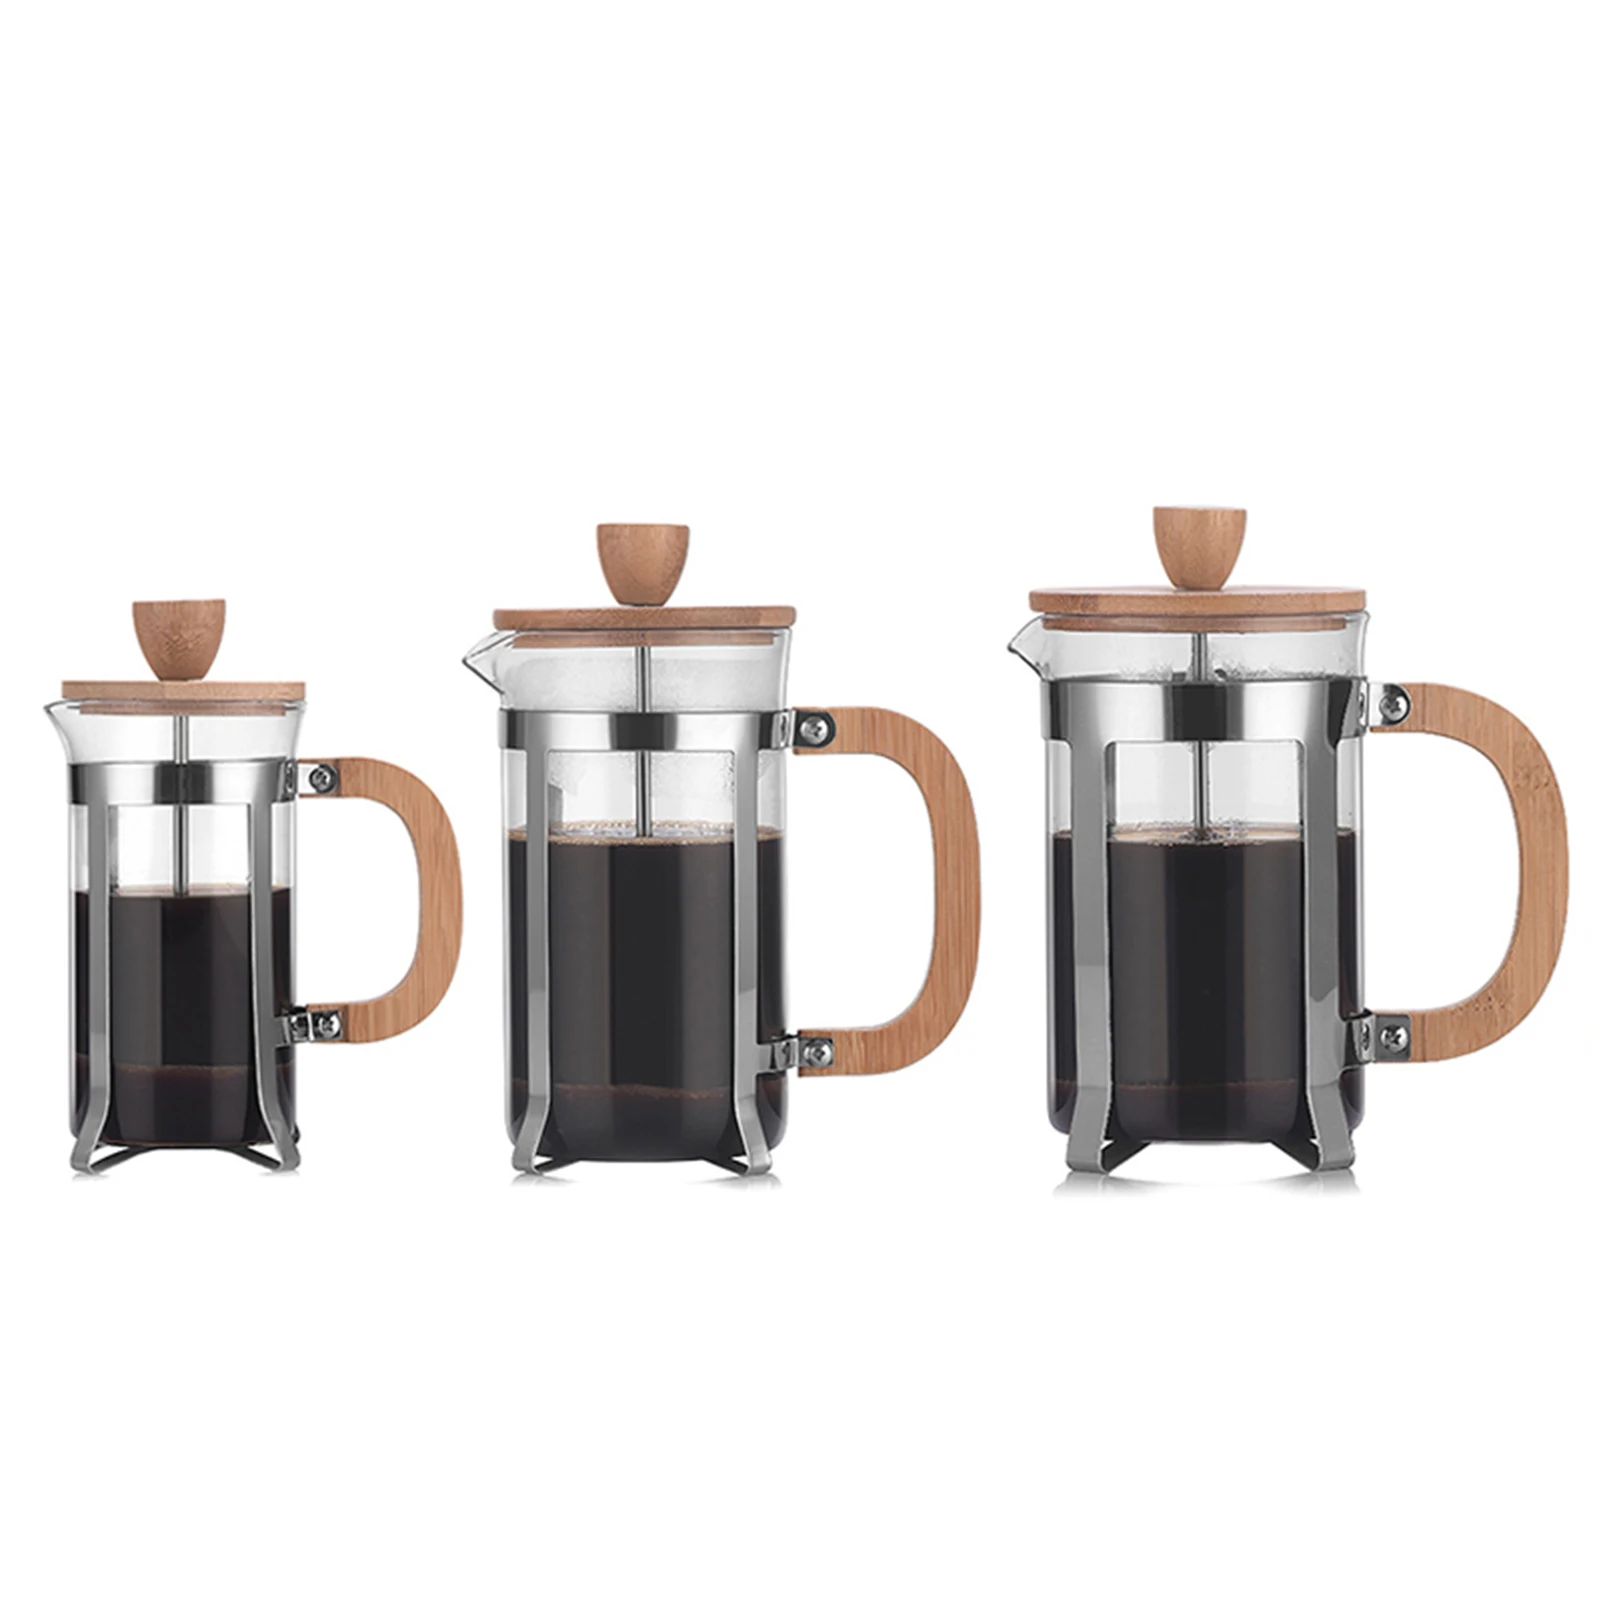 https://ae01.alicdn.com/kf/Hfe1d2d9d28f7448dac6a6f47e2a20e3bm/French-Press-Coffee-Maker-Large-Capacity-Manual-Heat-Resistant-Stainless-Steel-Glass-Transparent-Manual-Coffee-Tea.jpg